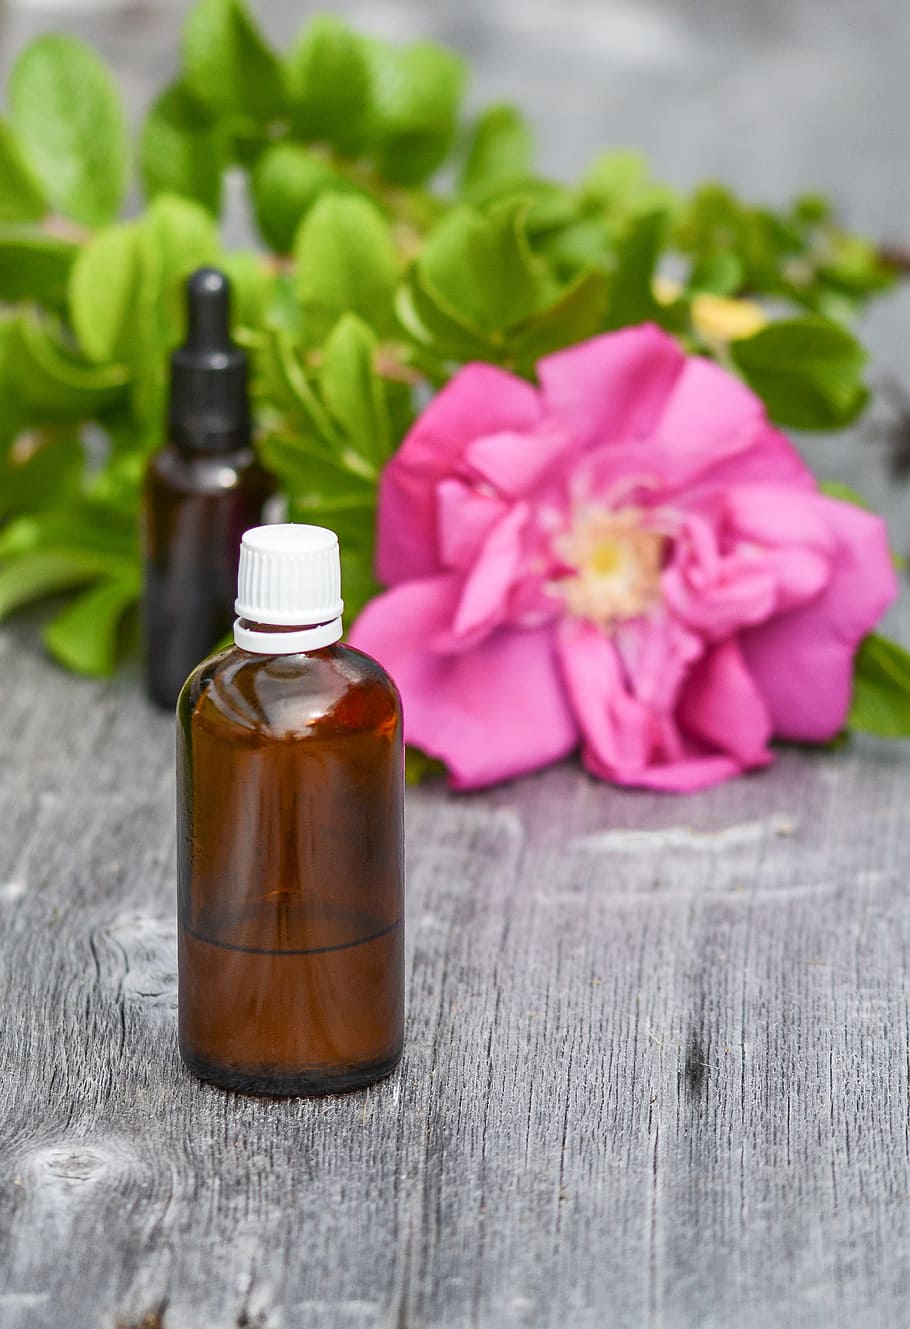 brown glass bottle near pink rose on gray surface, essential oils